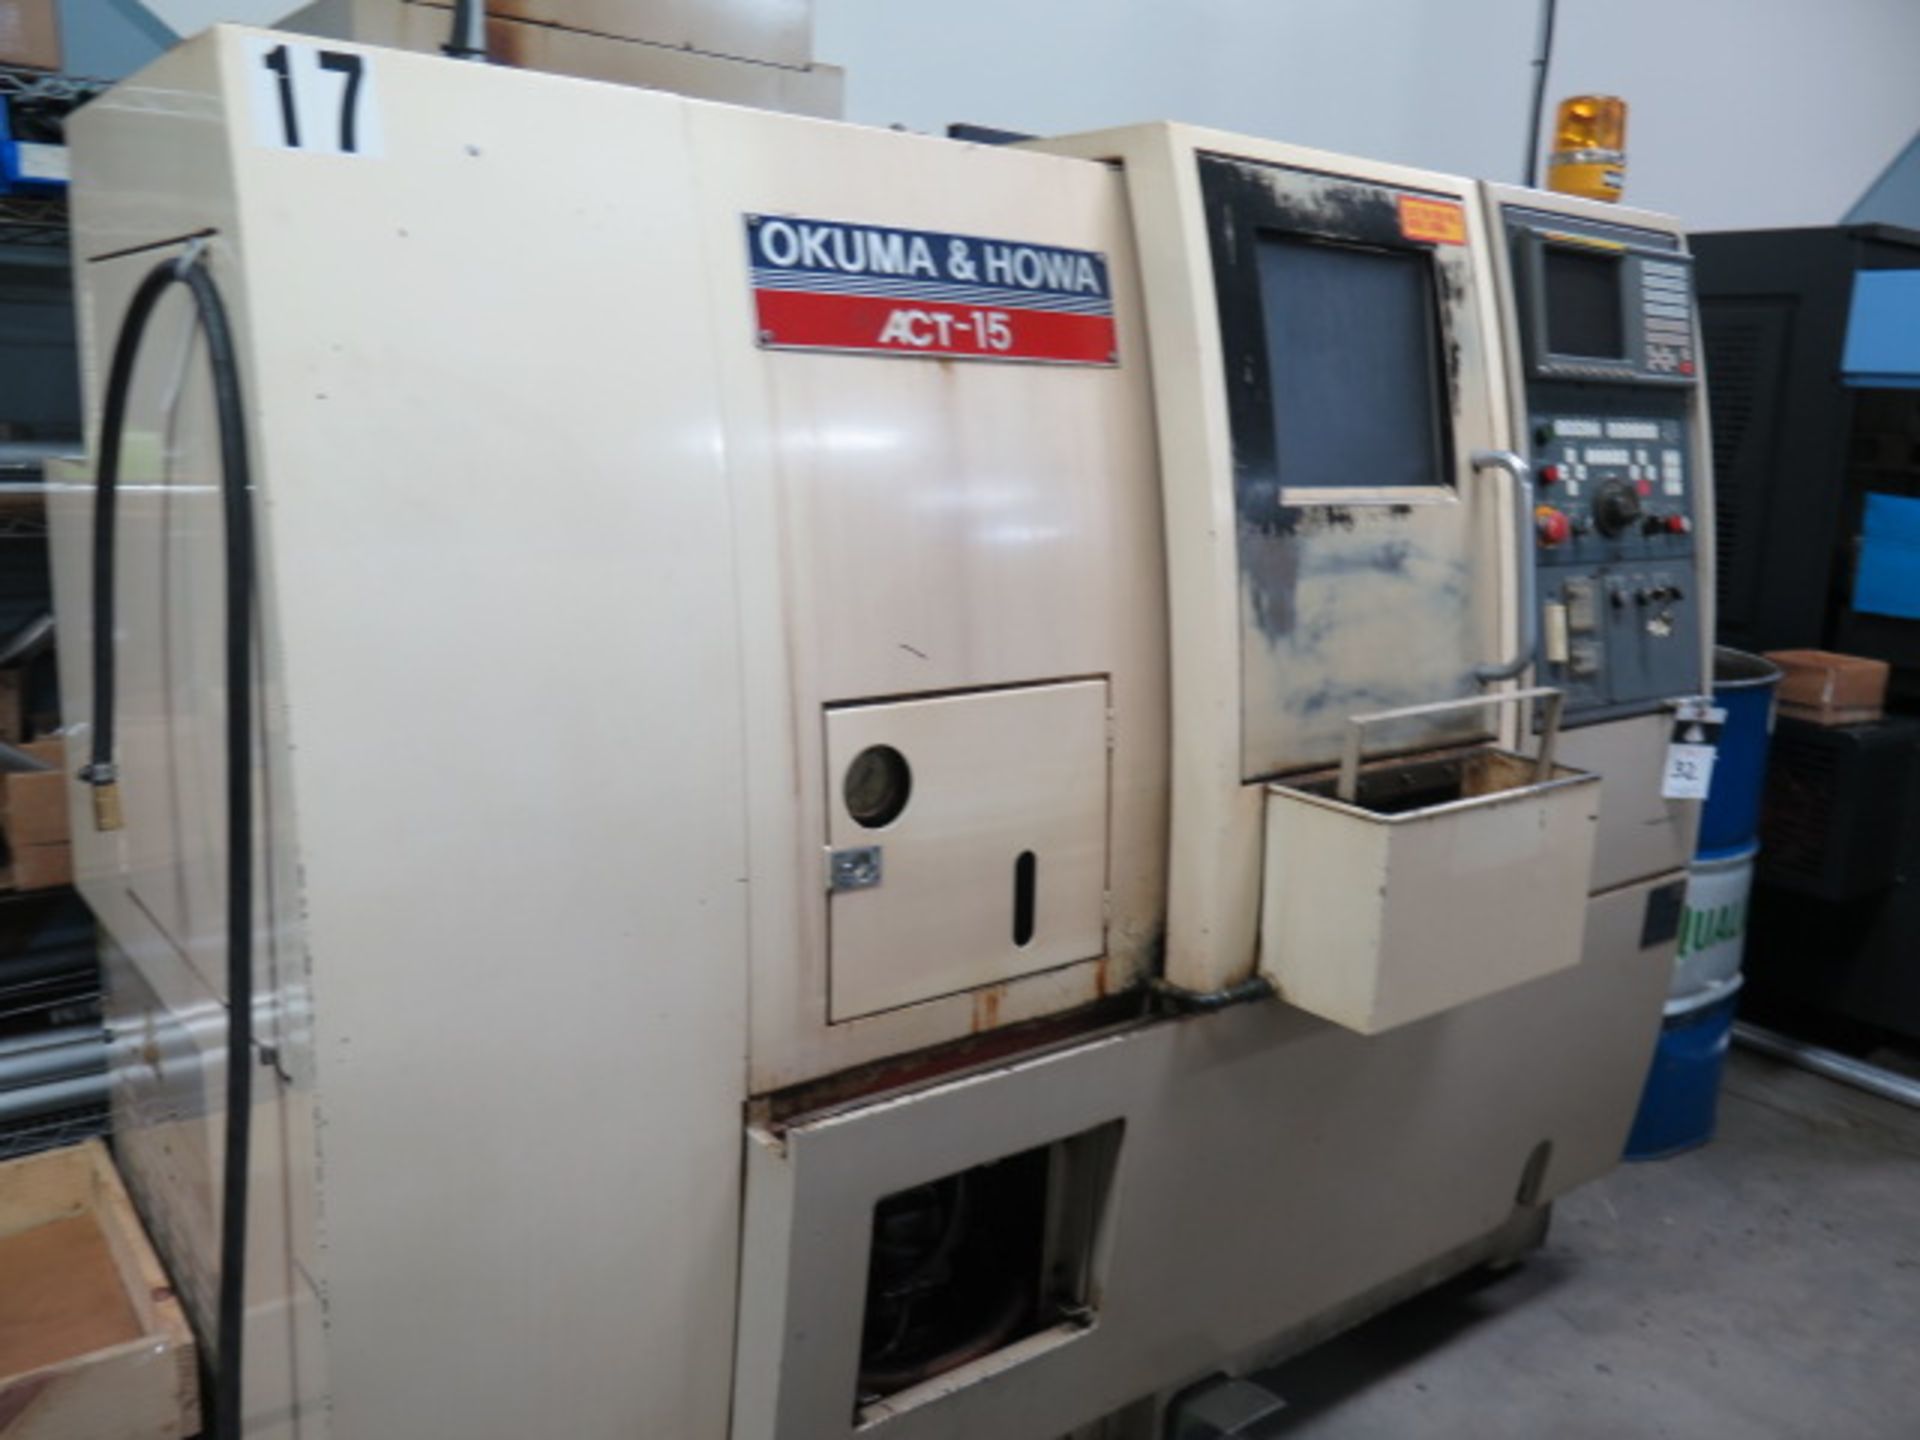 Okuma & Howa ACT-15 CNC Turning Center s/n 00082 w/ Fanuc 18-T Controls,8-Station Turret, SOLD AS IS - Image 3 of 11